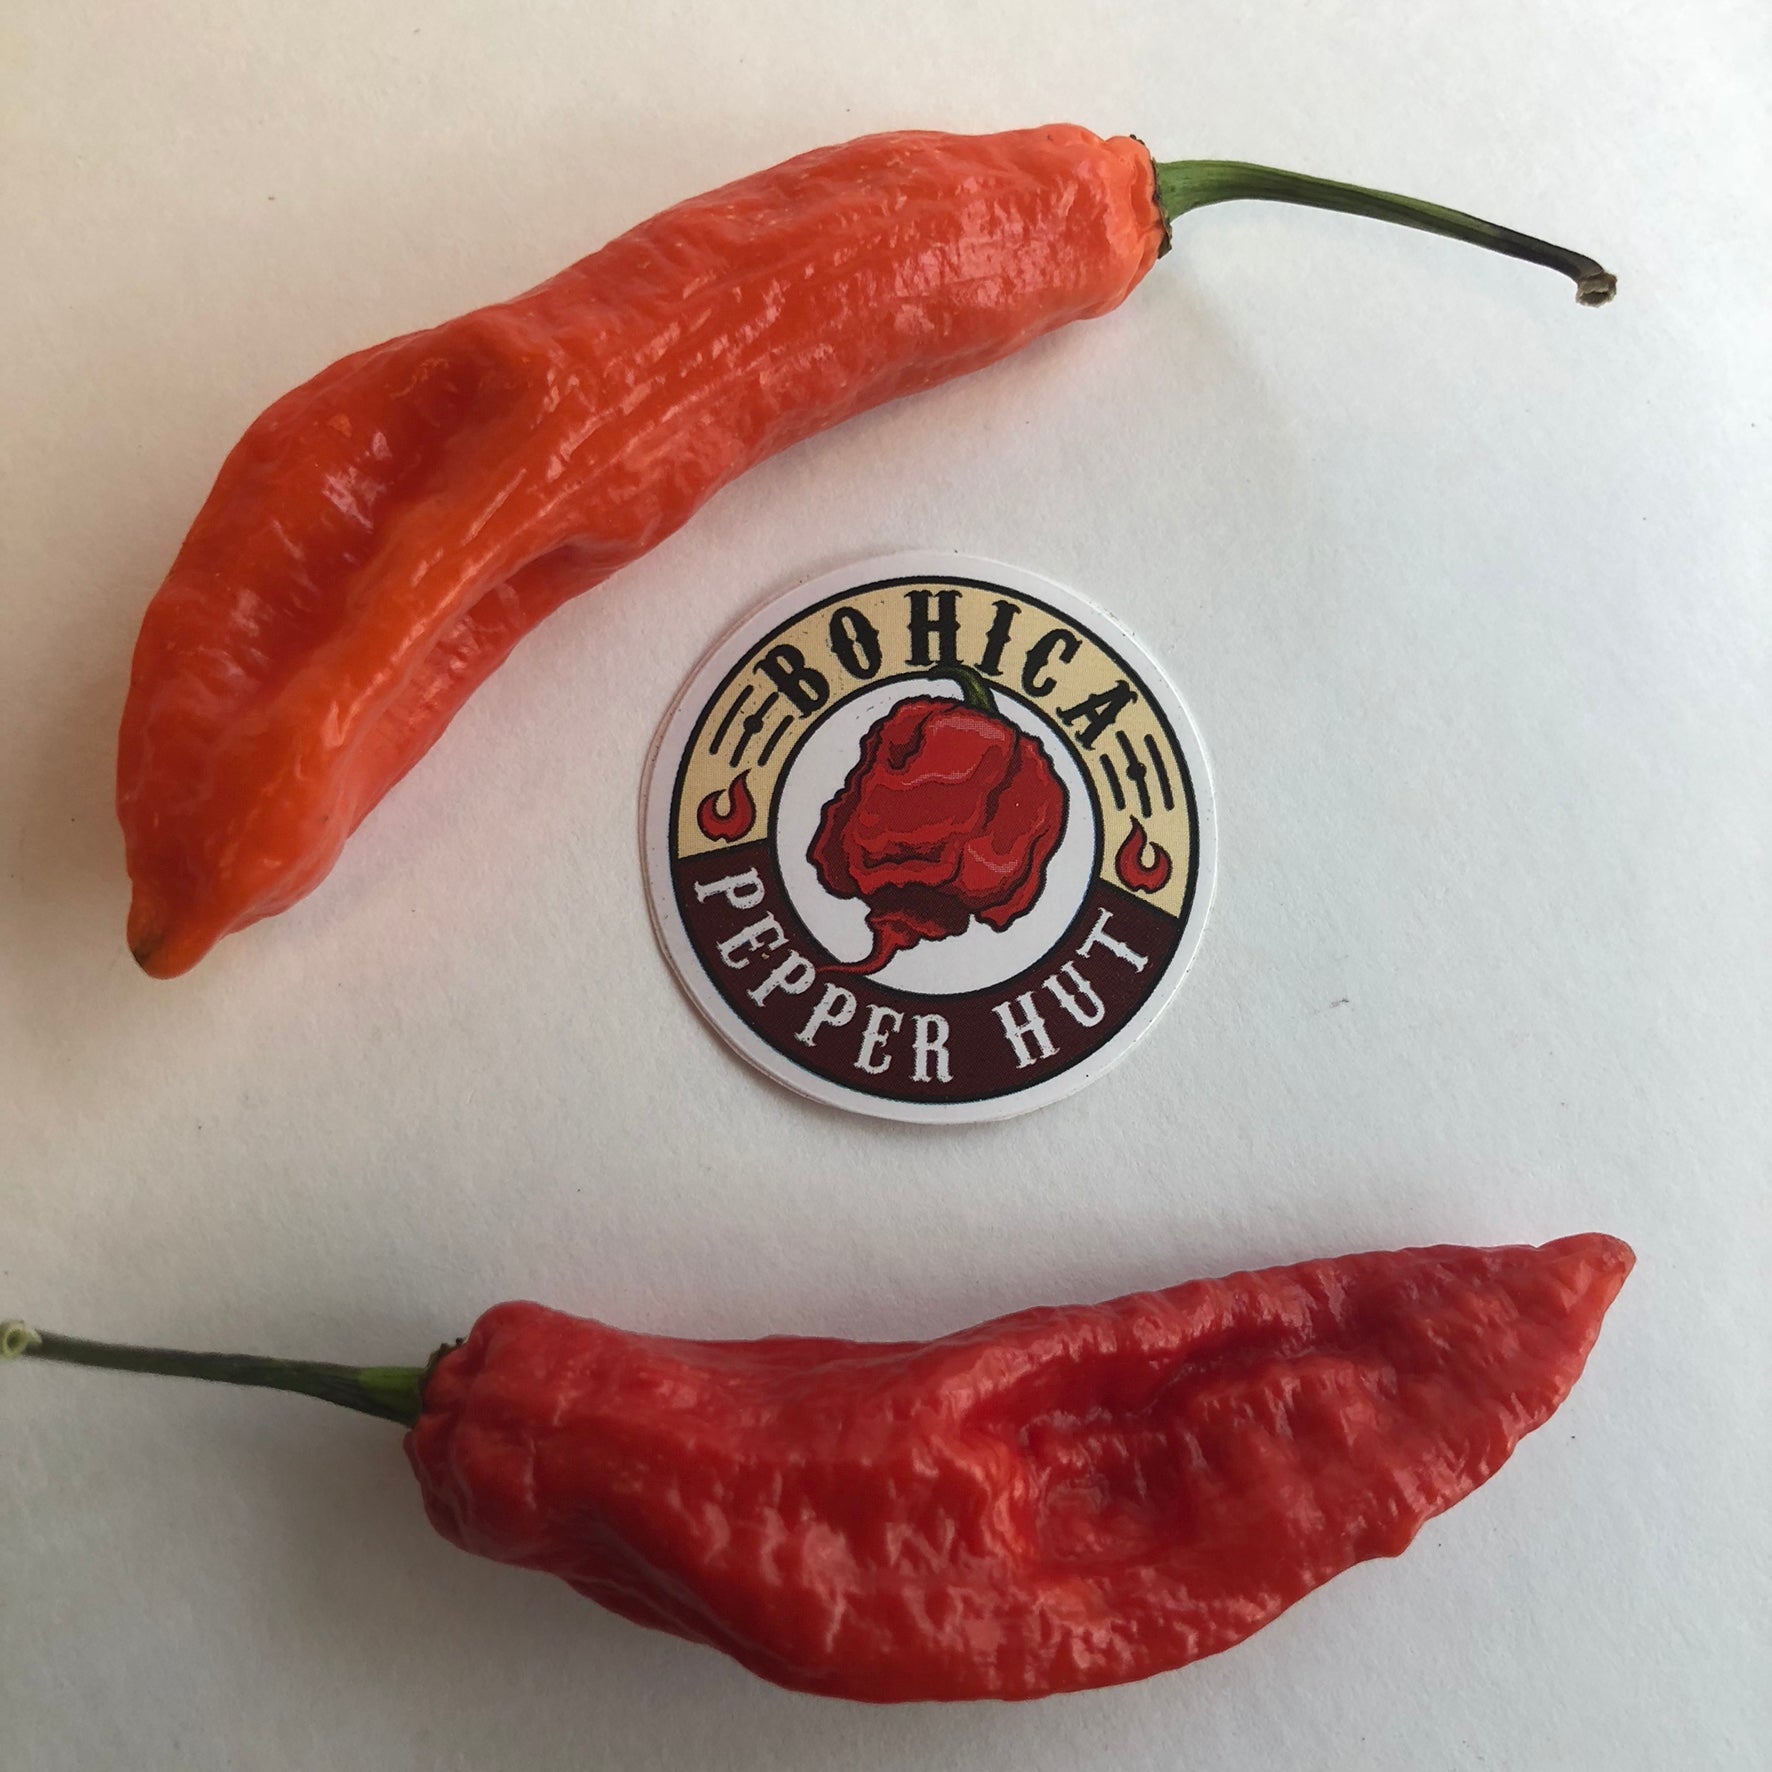 Jalapeno Ghostly - Seeds - Bohica Pepper Hut 